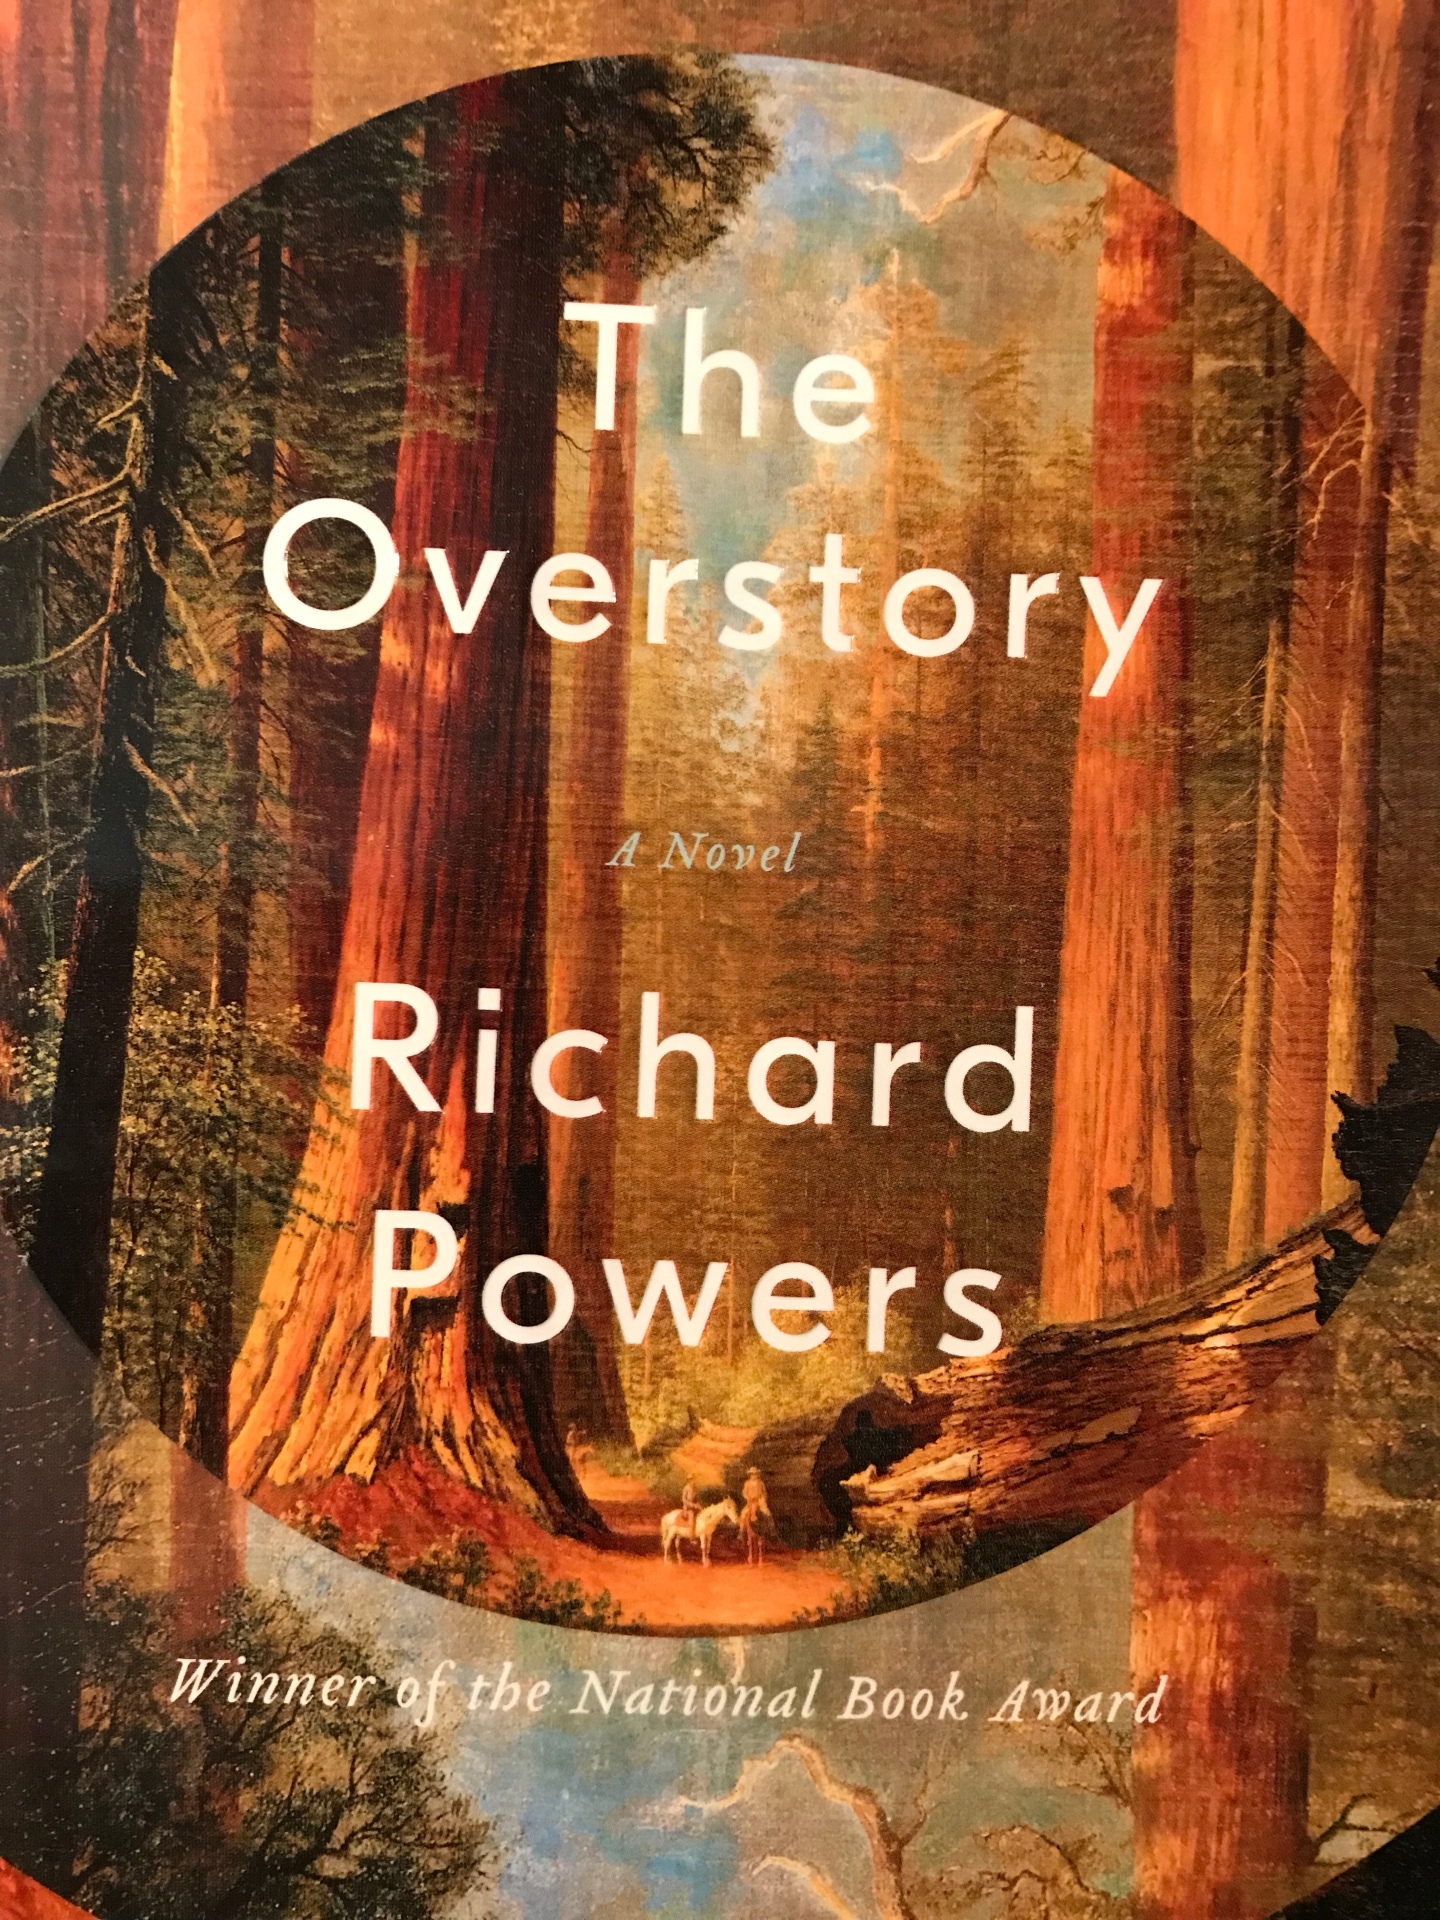 new york times book review the overstory